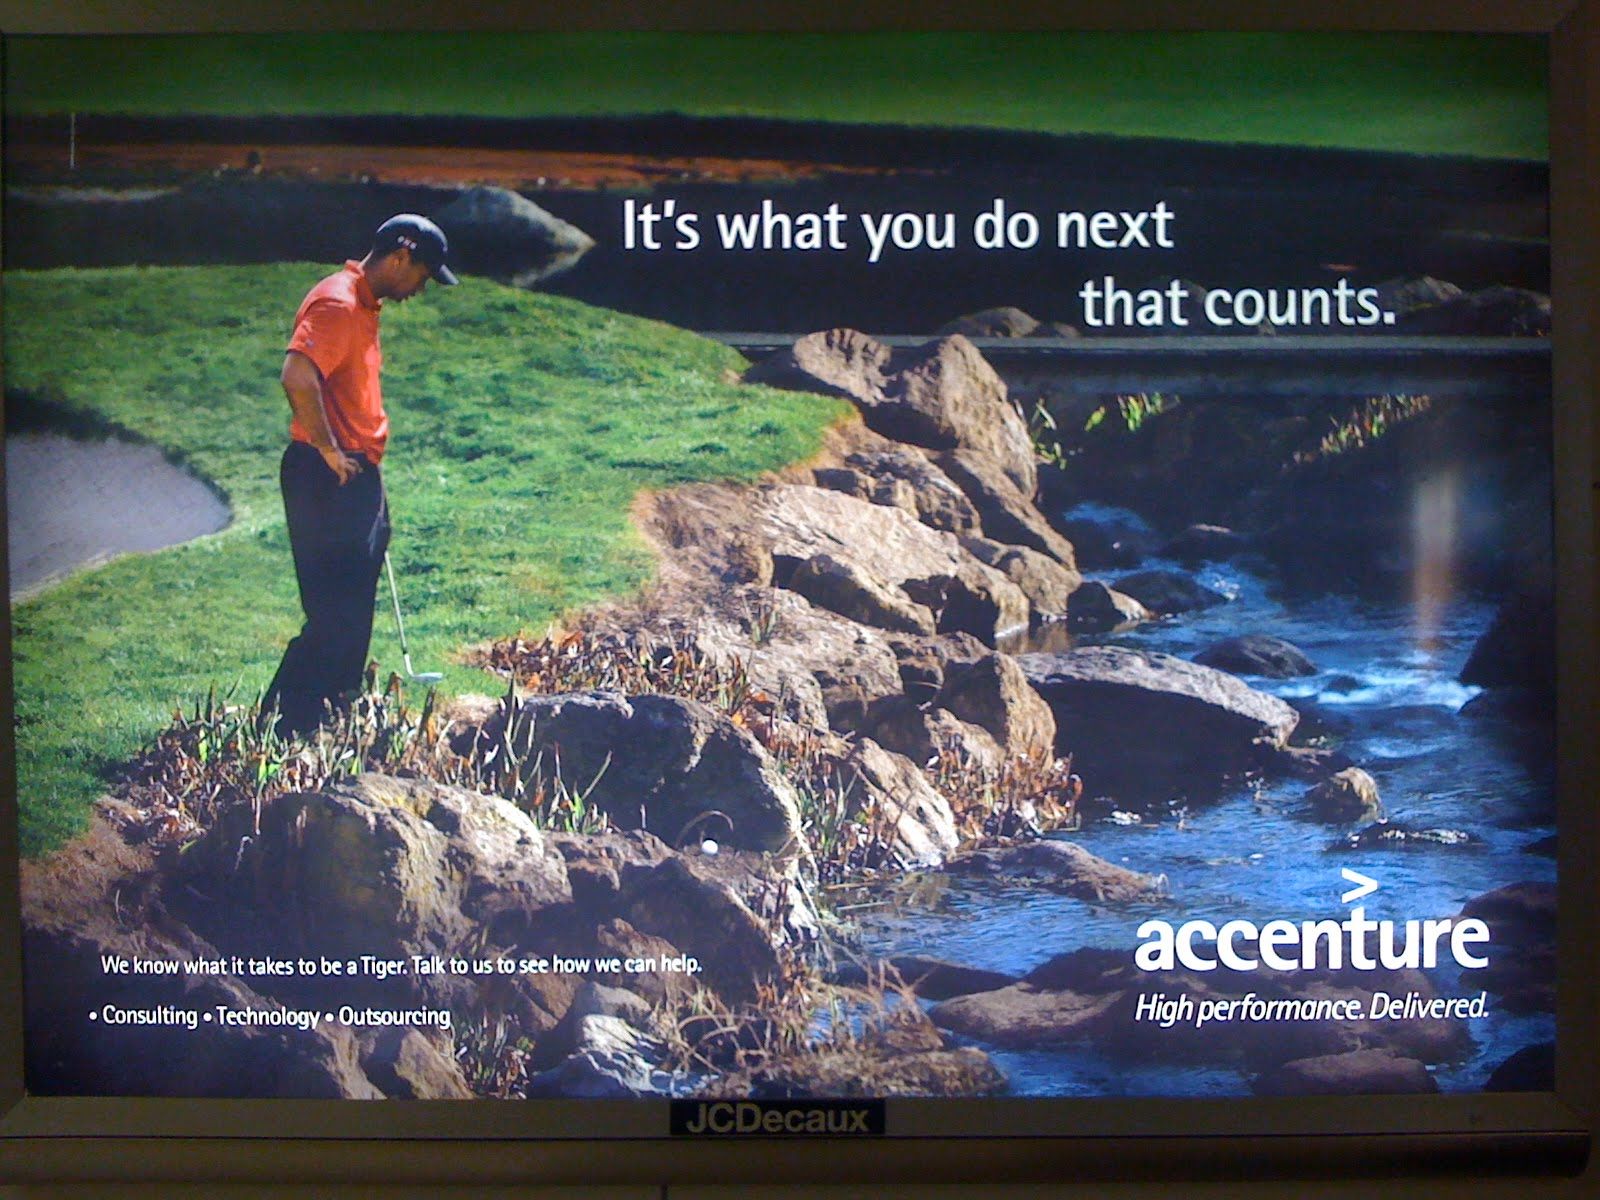 Accenture Pictures By Brennus Hefforde On Freshwall - Accenture Go On Be A Tiger - HD Wallpaper 